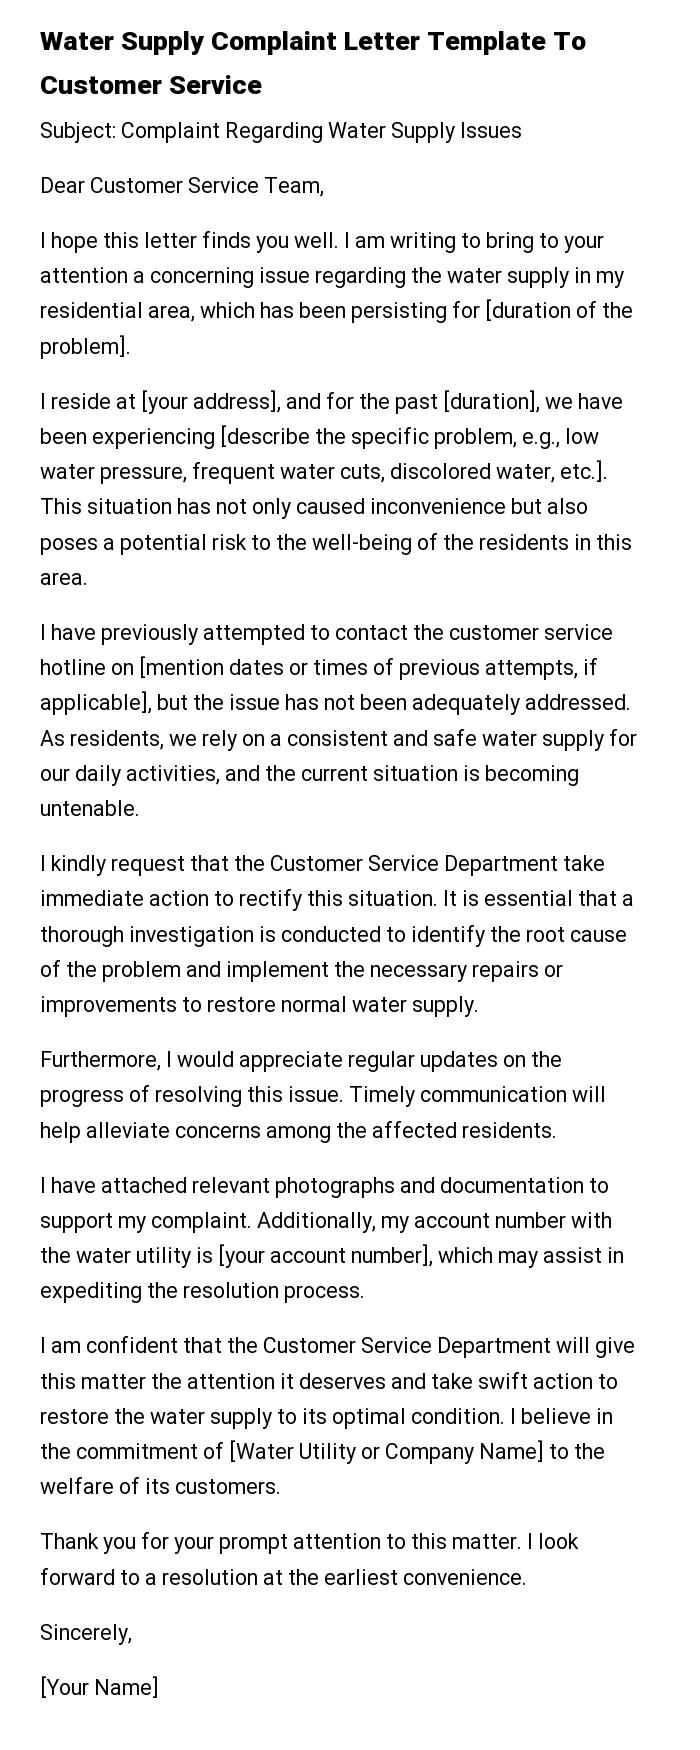 Water Supply Complaint Letter Template To Customer Service